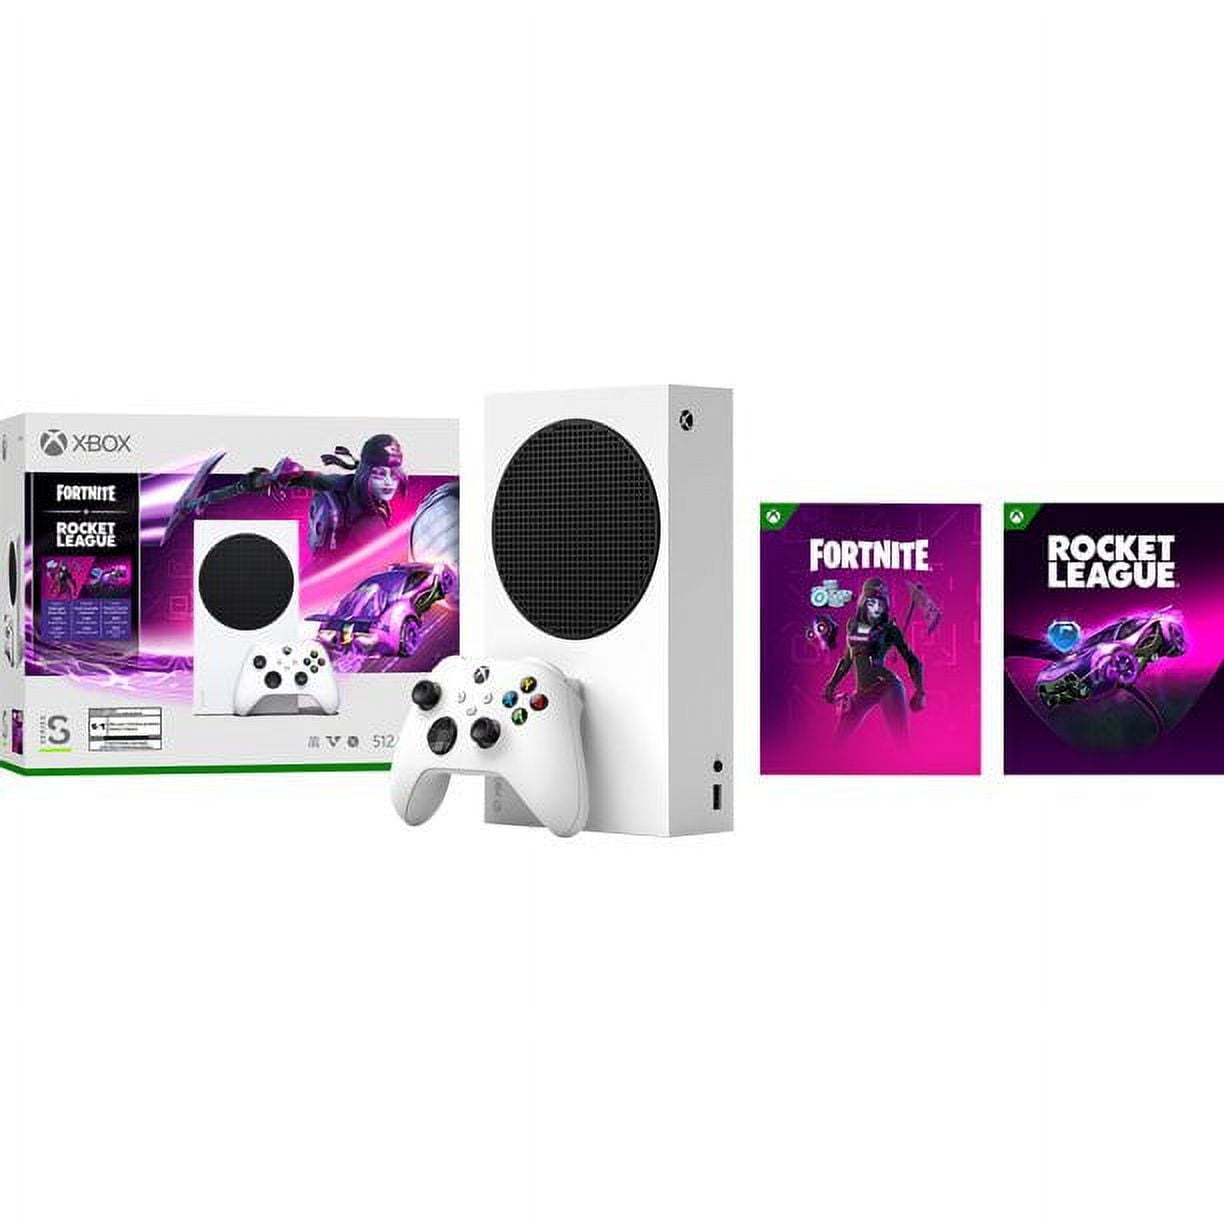 Save $50 on an Xbox One S 'Fortnite' bundle and get a free controller from  Best Buy